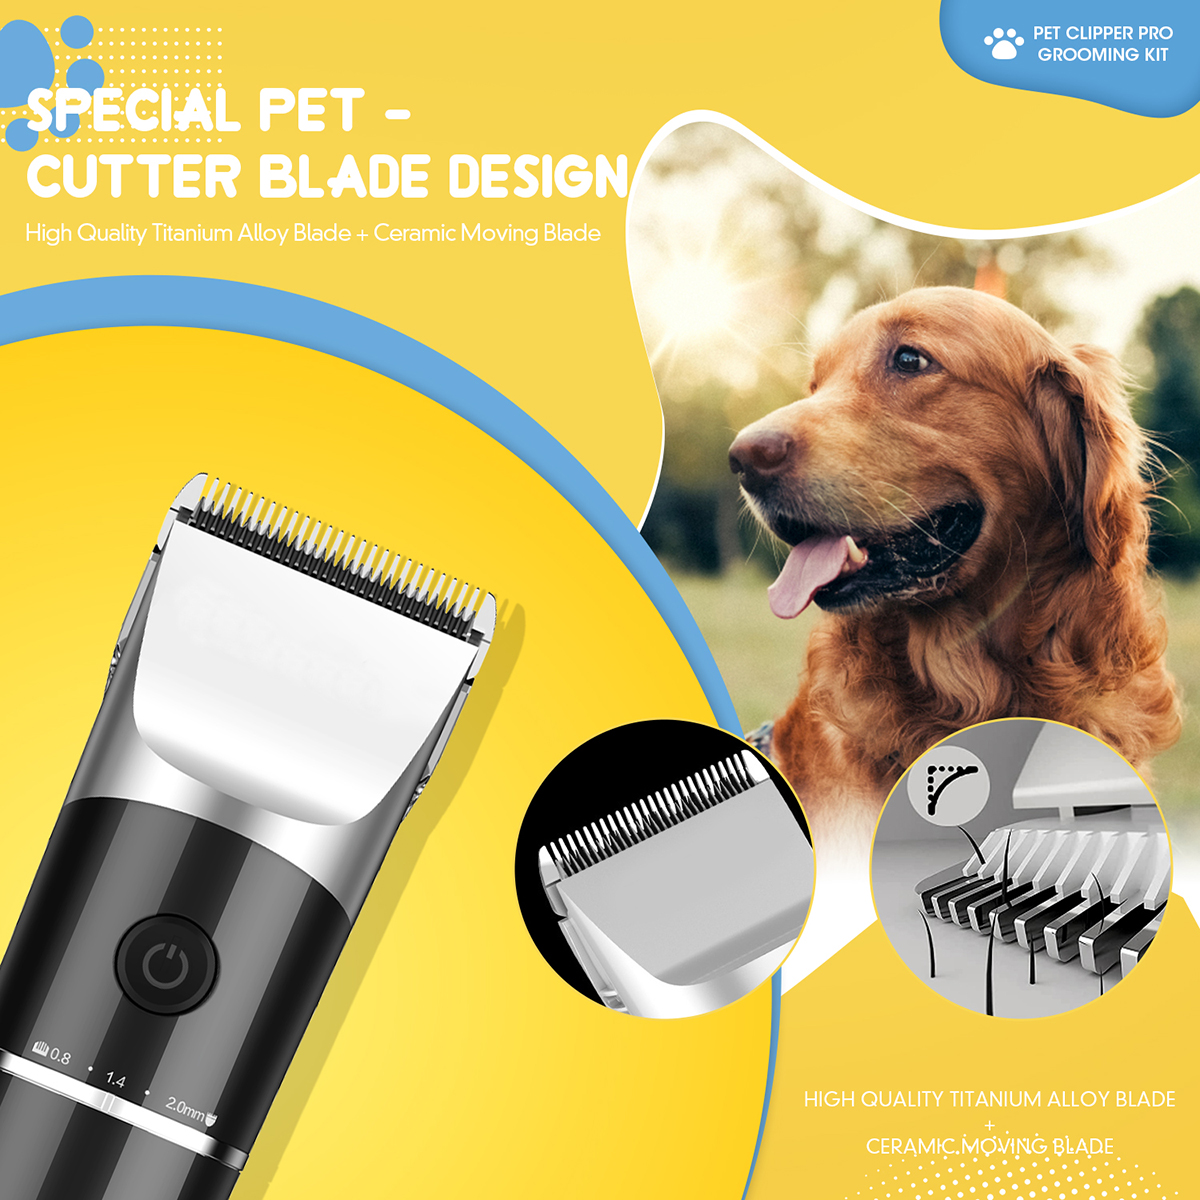 8W-Dog-Hair-Clipper-Professional-Rechargeable-Cordless-Pet-Grooming-Kit-Low-Noise-Pet-Cat-Supplies-Q-1952398-4